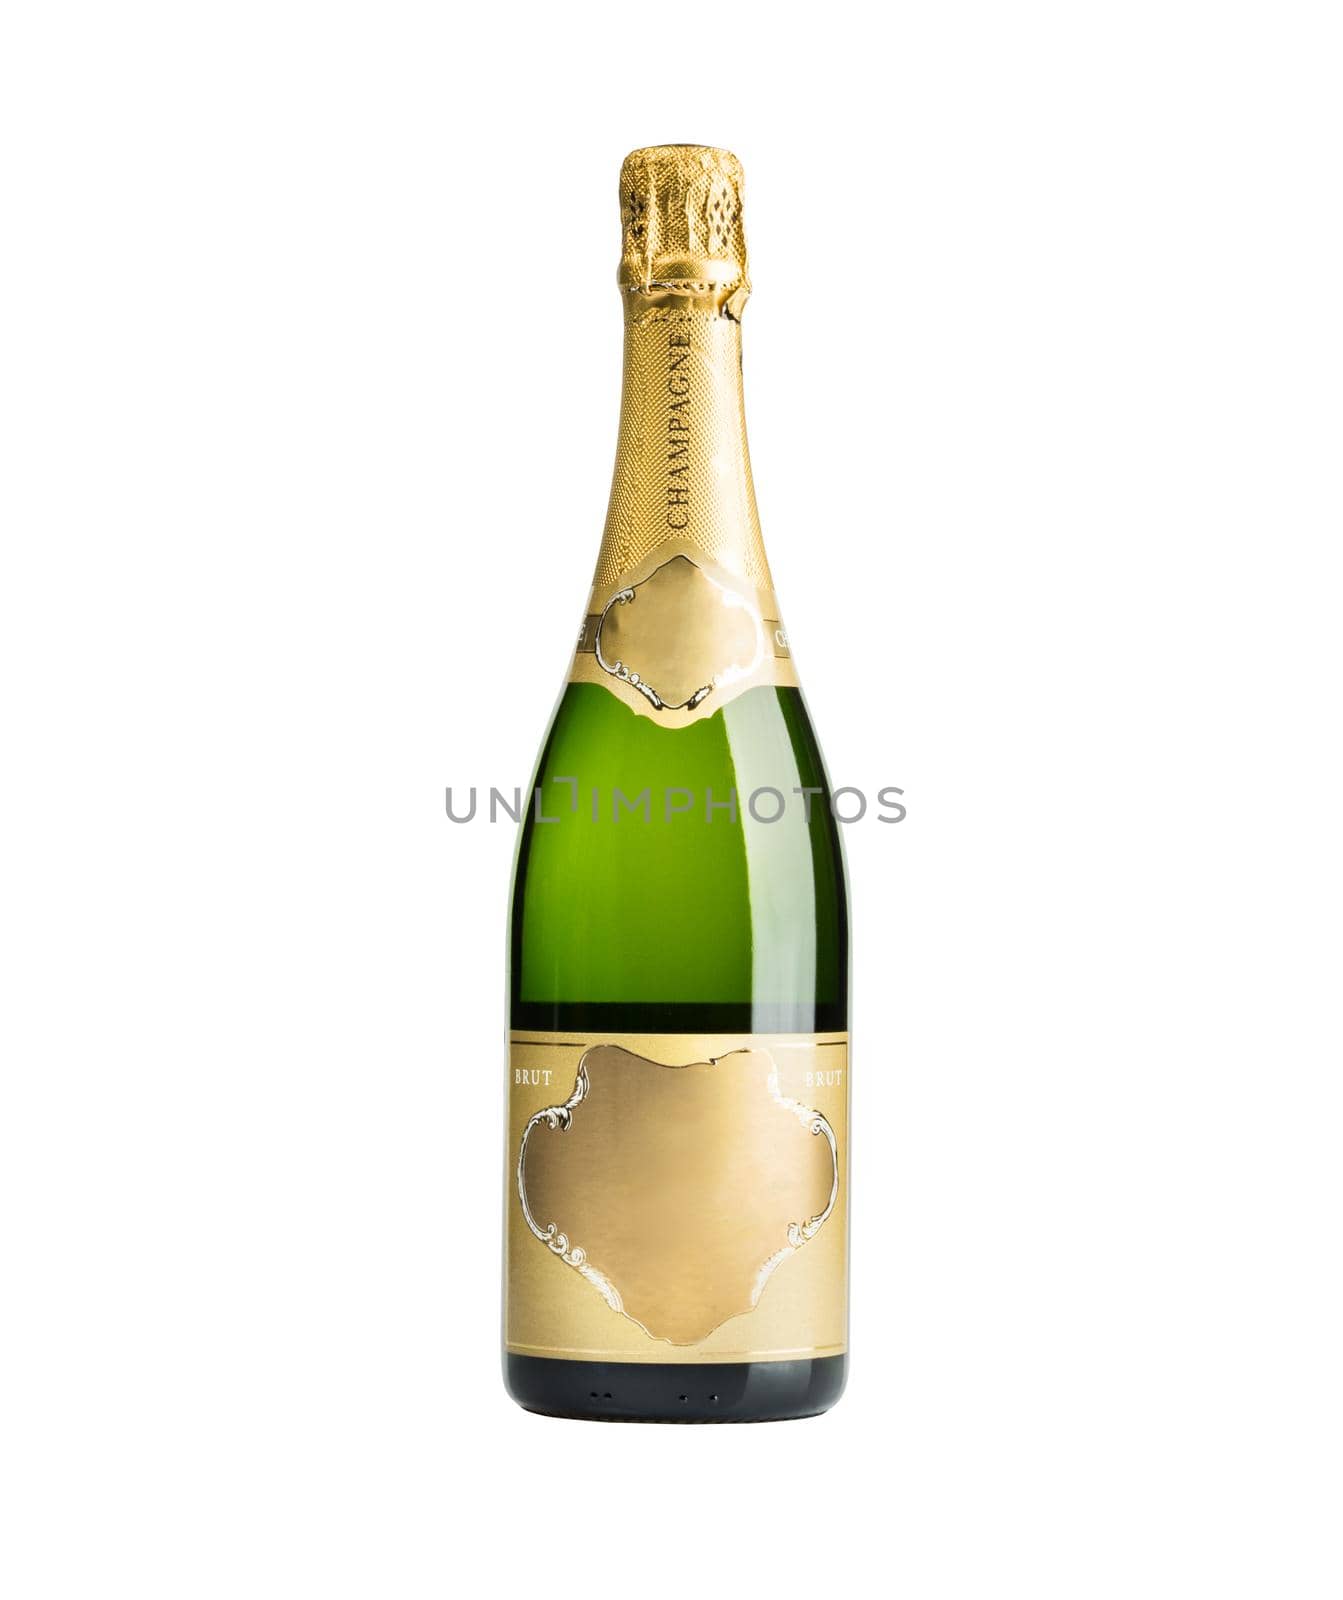 New unopened plain bottle of brut champagne isolated on white